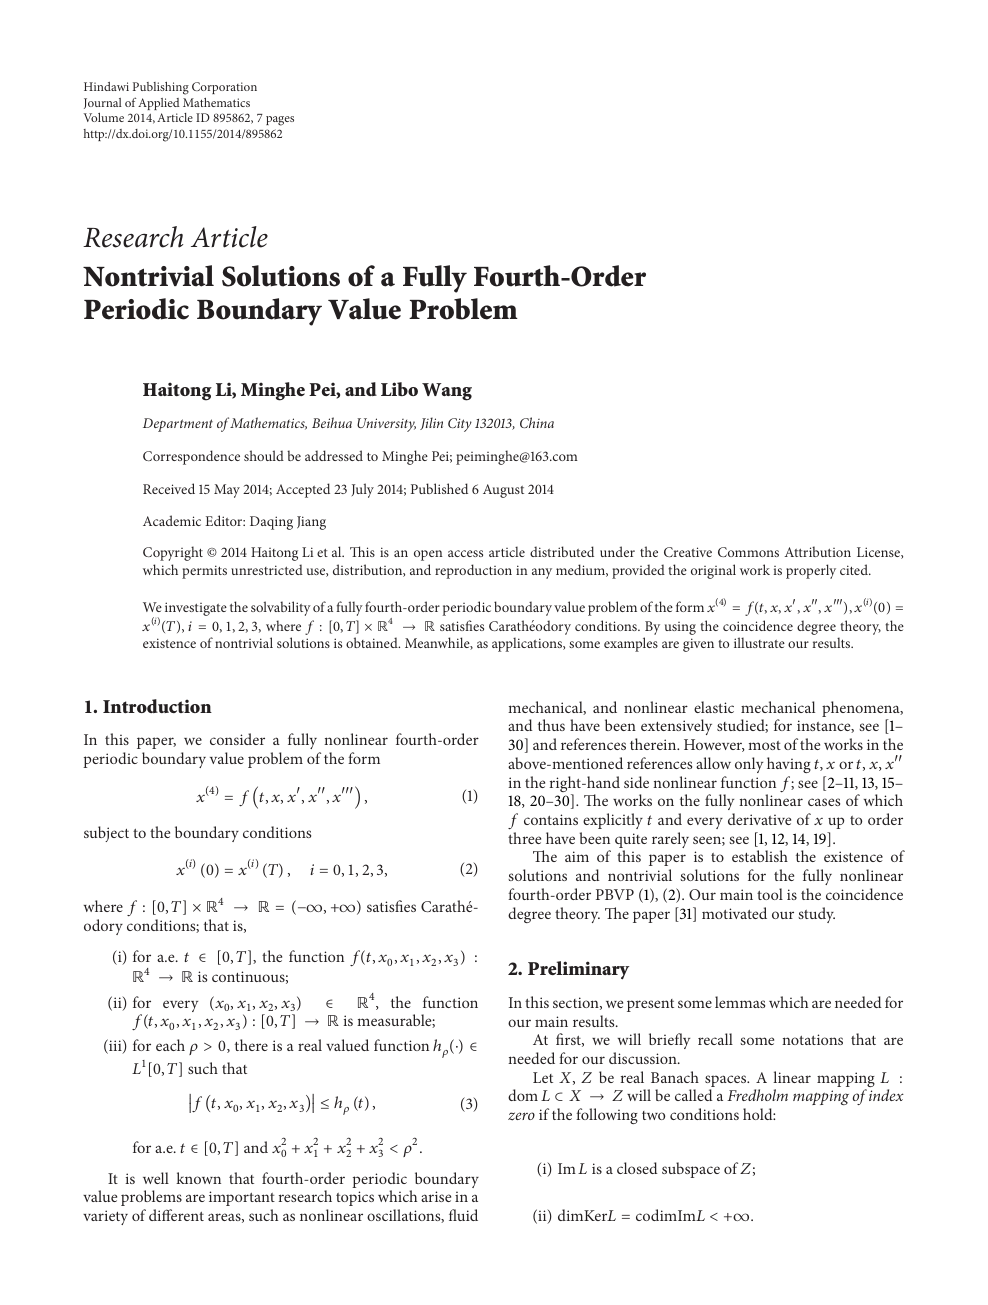 Nontrivial Solutions Of A Fully Fourth Order Periodic Boundary Value Problem Topic Of Research Paper In Mathematics Download Scholarly Article Pdf And Read For Free On Cyberleninka Open Science Hub